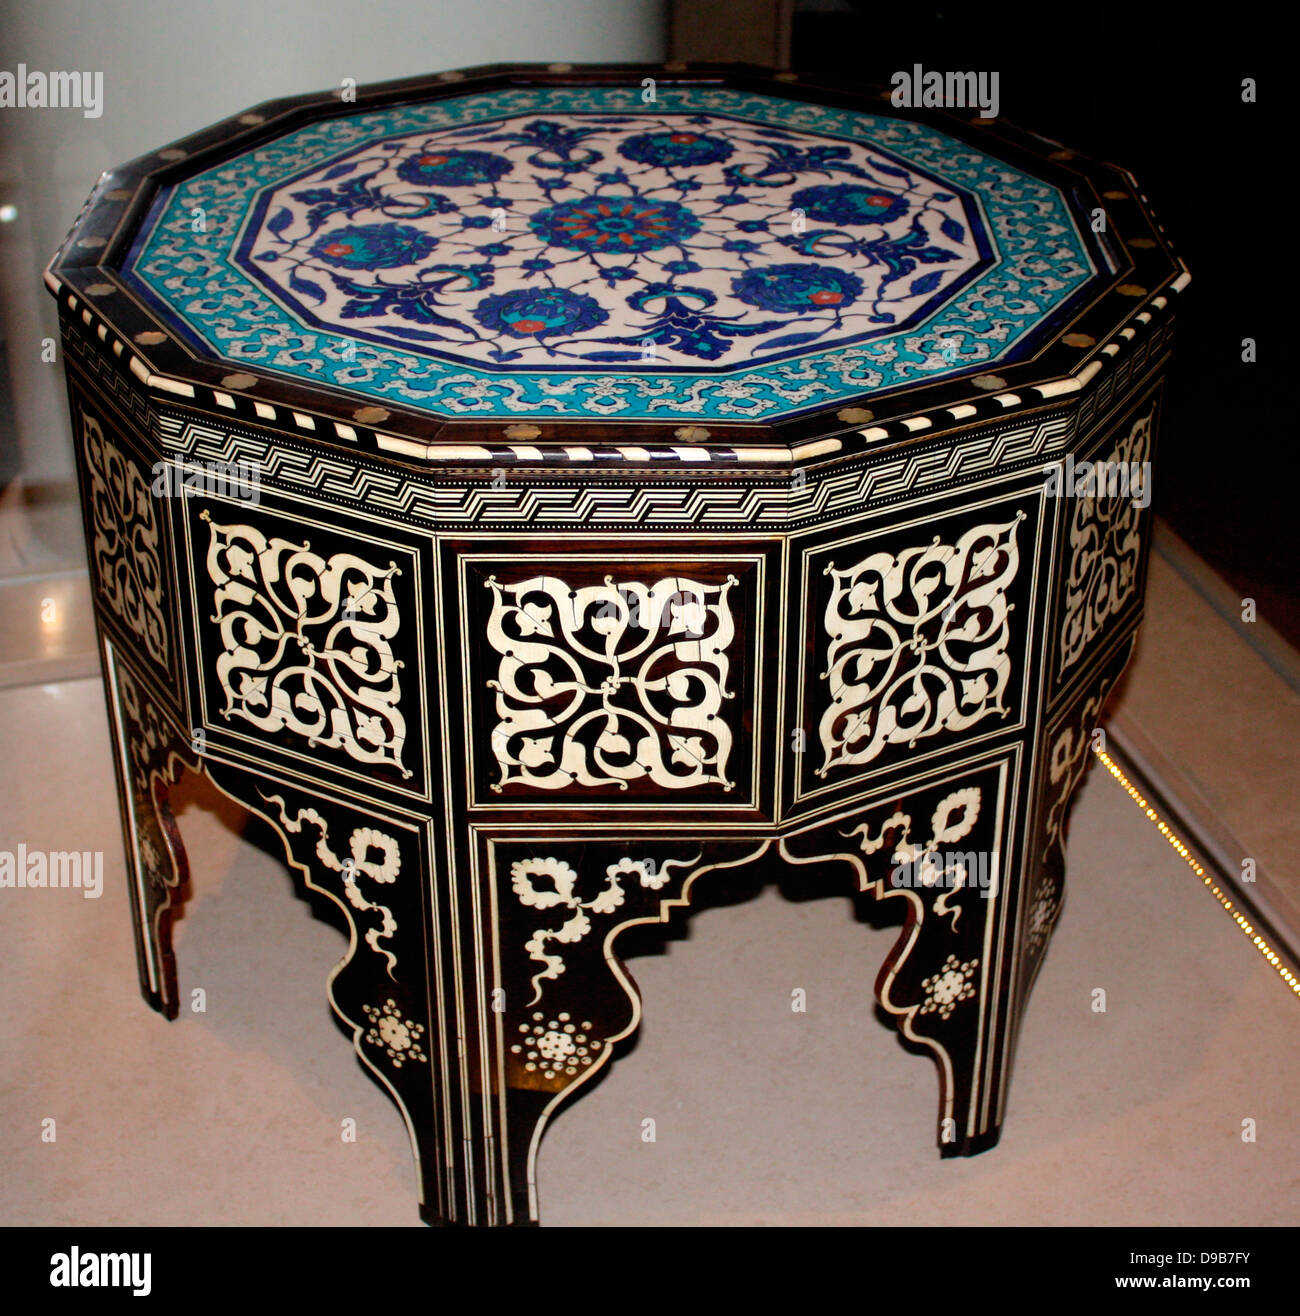 Tile-top Table. Wood faced with ebony, inlay of ivory and mother-of-pearl  fritware painted under glaze. Turkey, Iznik and Istanbul circa 1560. In Ottoman palaces, guests sat on a low bench or divan, built against the wall.  Trays of food and drink were set before them resting on tables of this type. Stock Photo